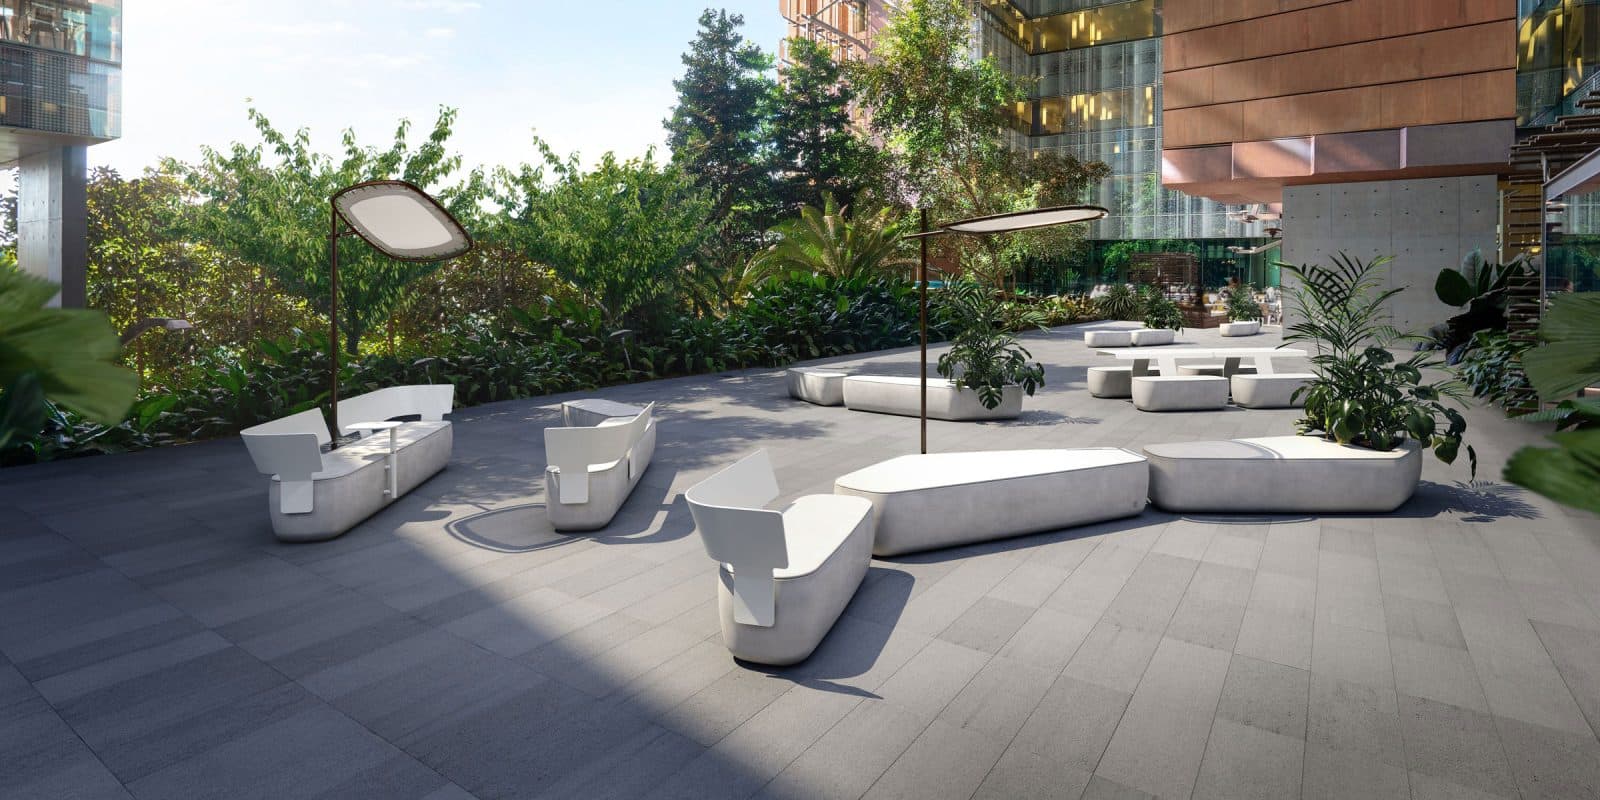 Designed by Adam Goodrum for Tait the Scape Island - a modular concrete planter seat - is designed to encourage moments of respite.